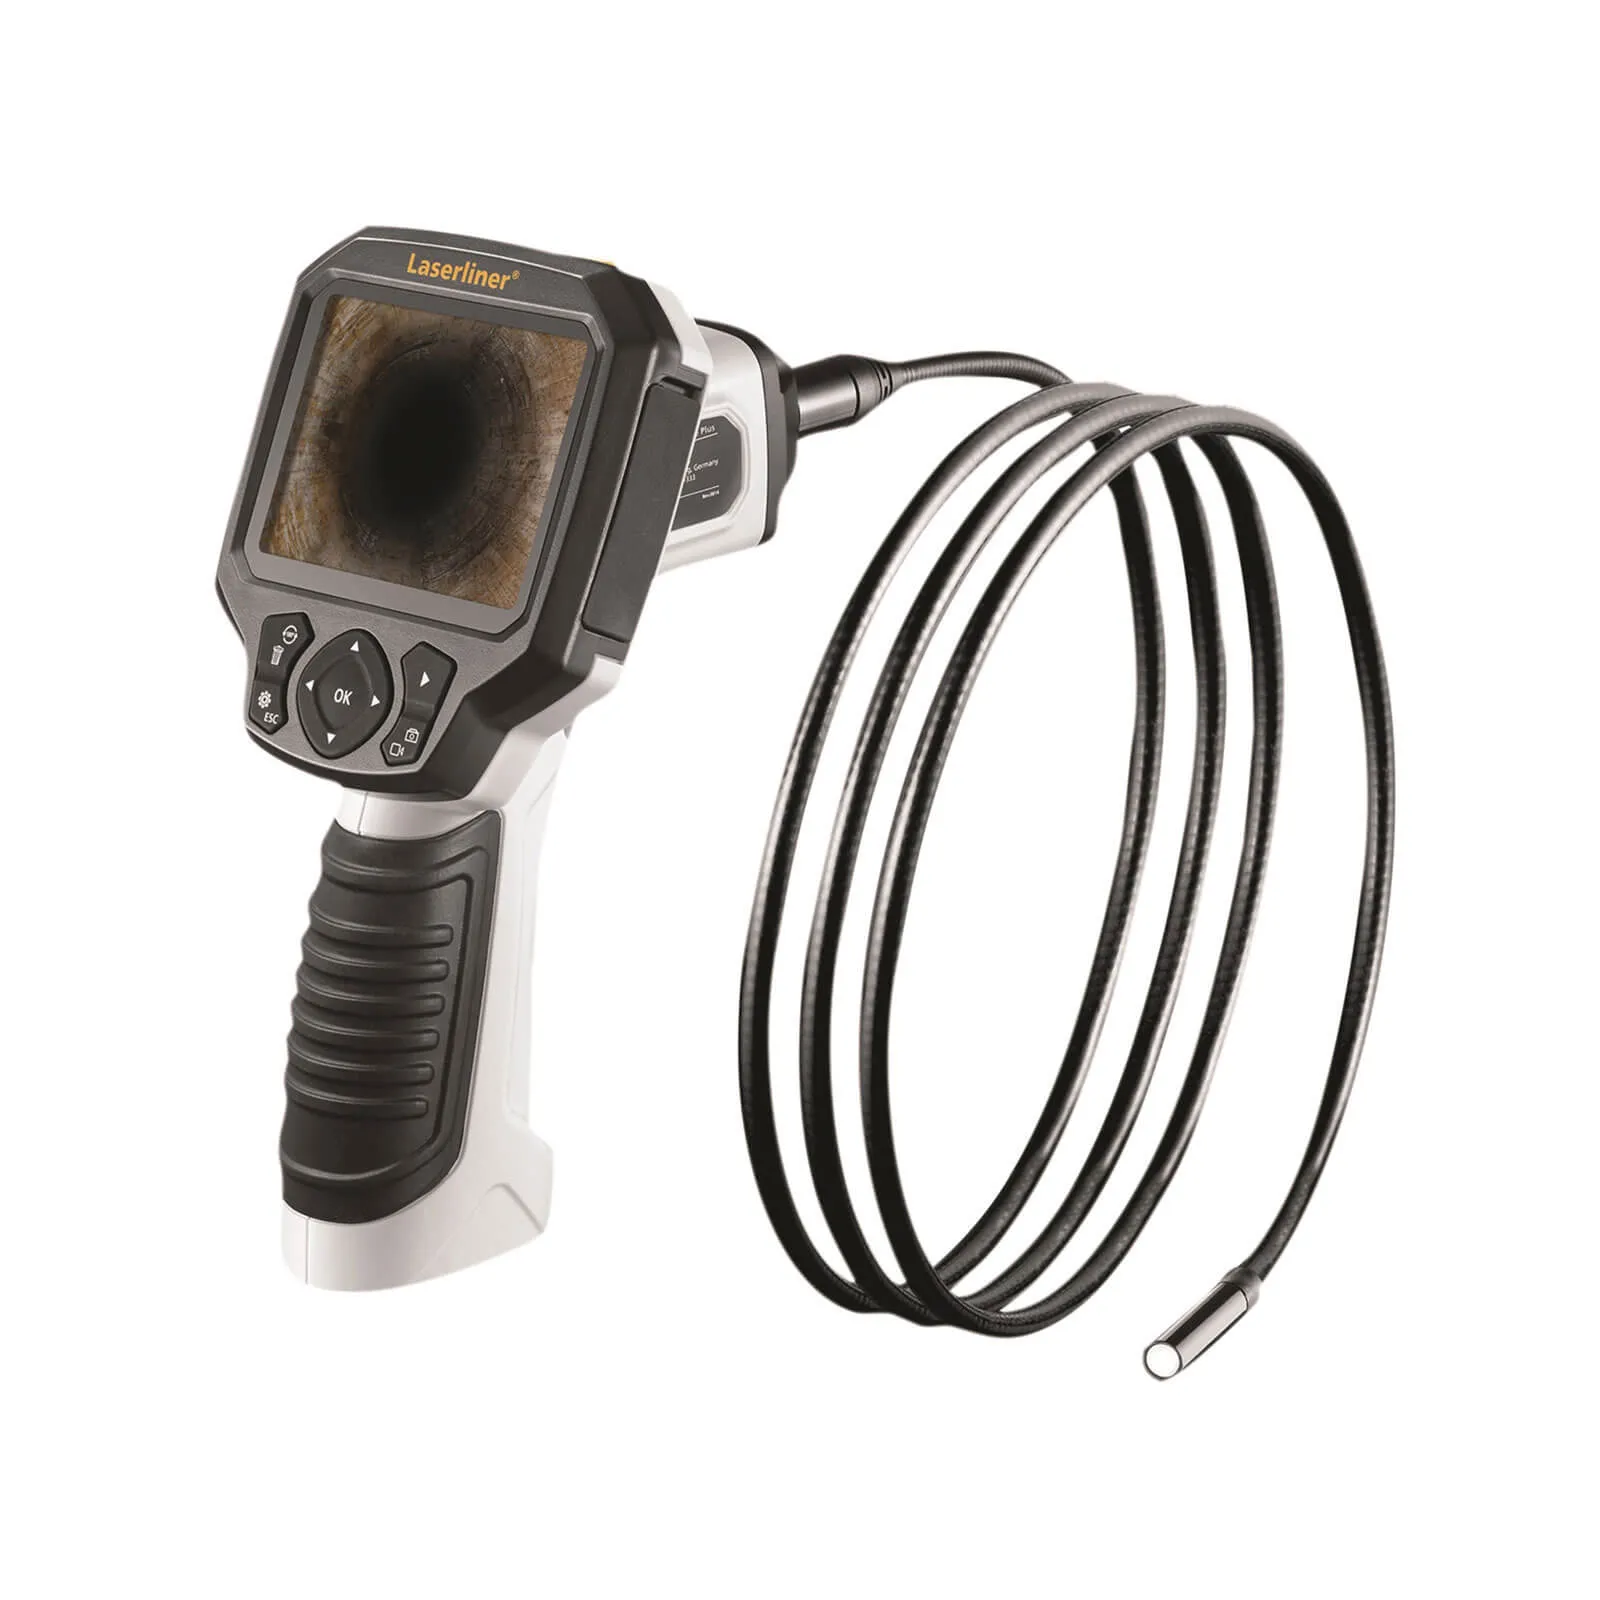 LaserLiner Videoscope Plus Recordable Inspection Camera 2 Metre Long